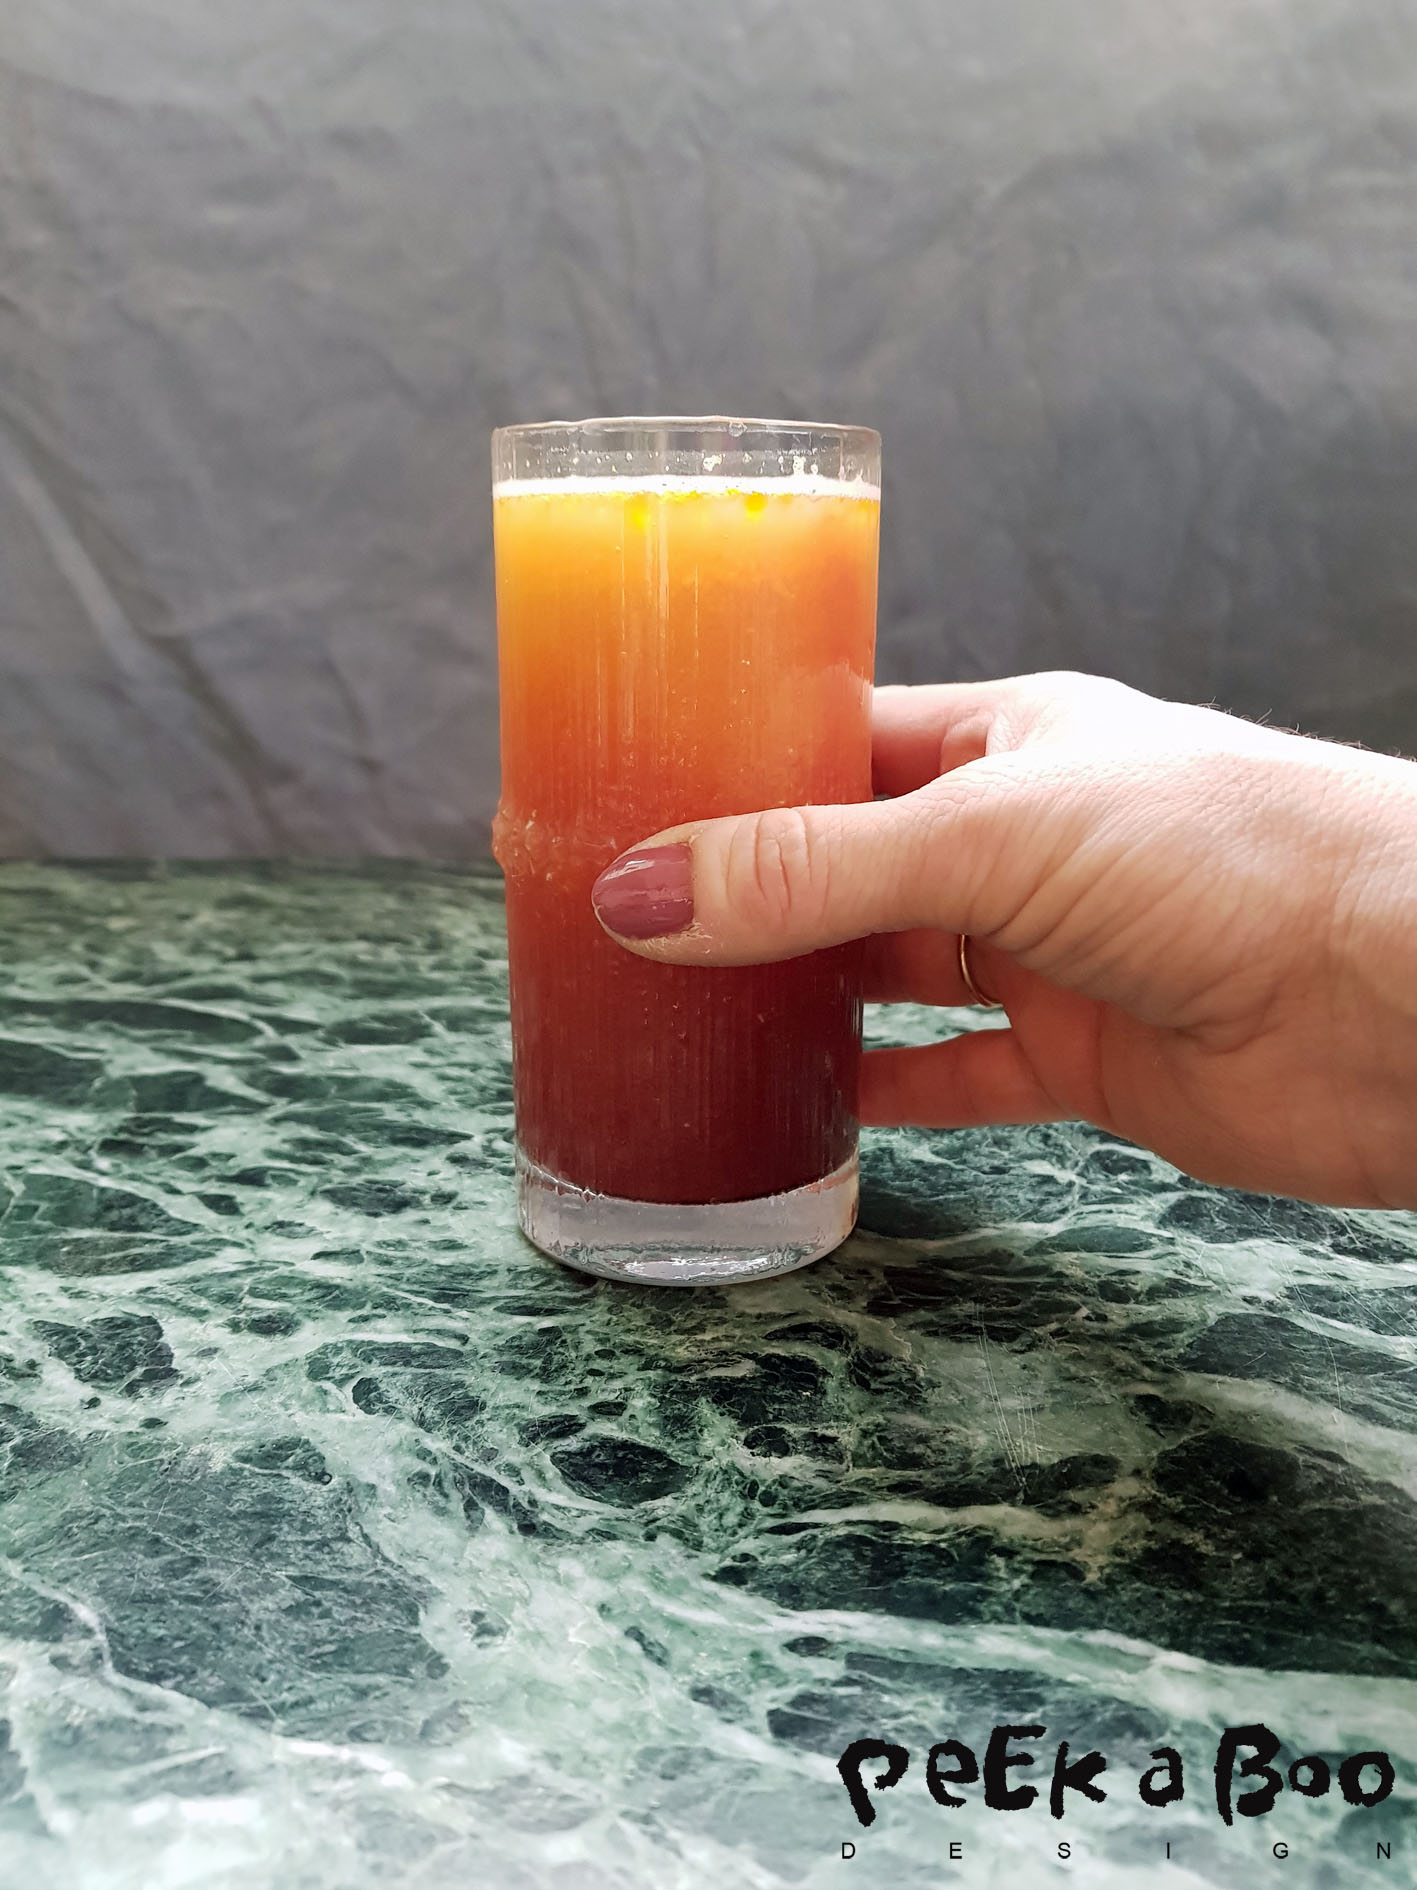 The perfect mix of carrot, apple a little bit of beetroot and orange.